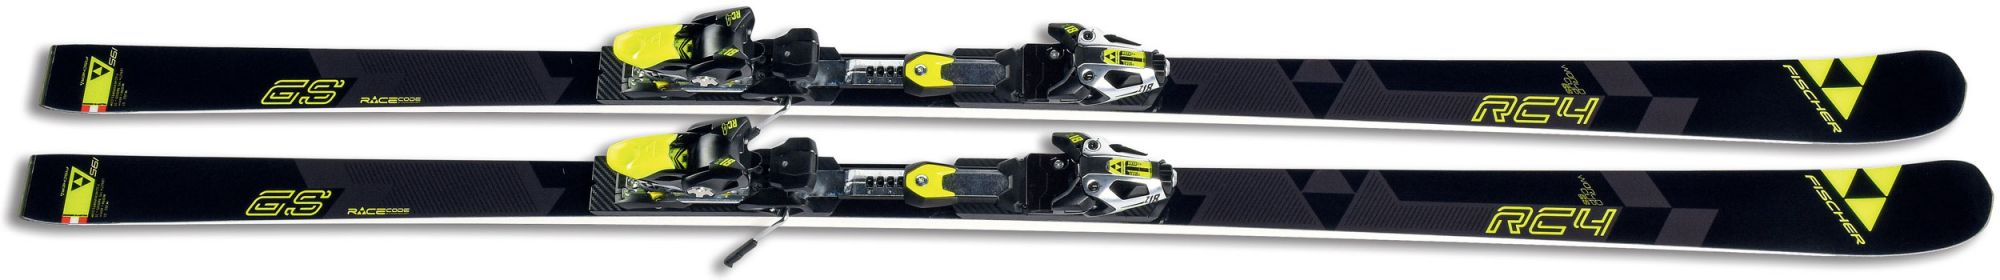 Sci fischer' RC4 Worldcup GS Curv Booster Masters